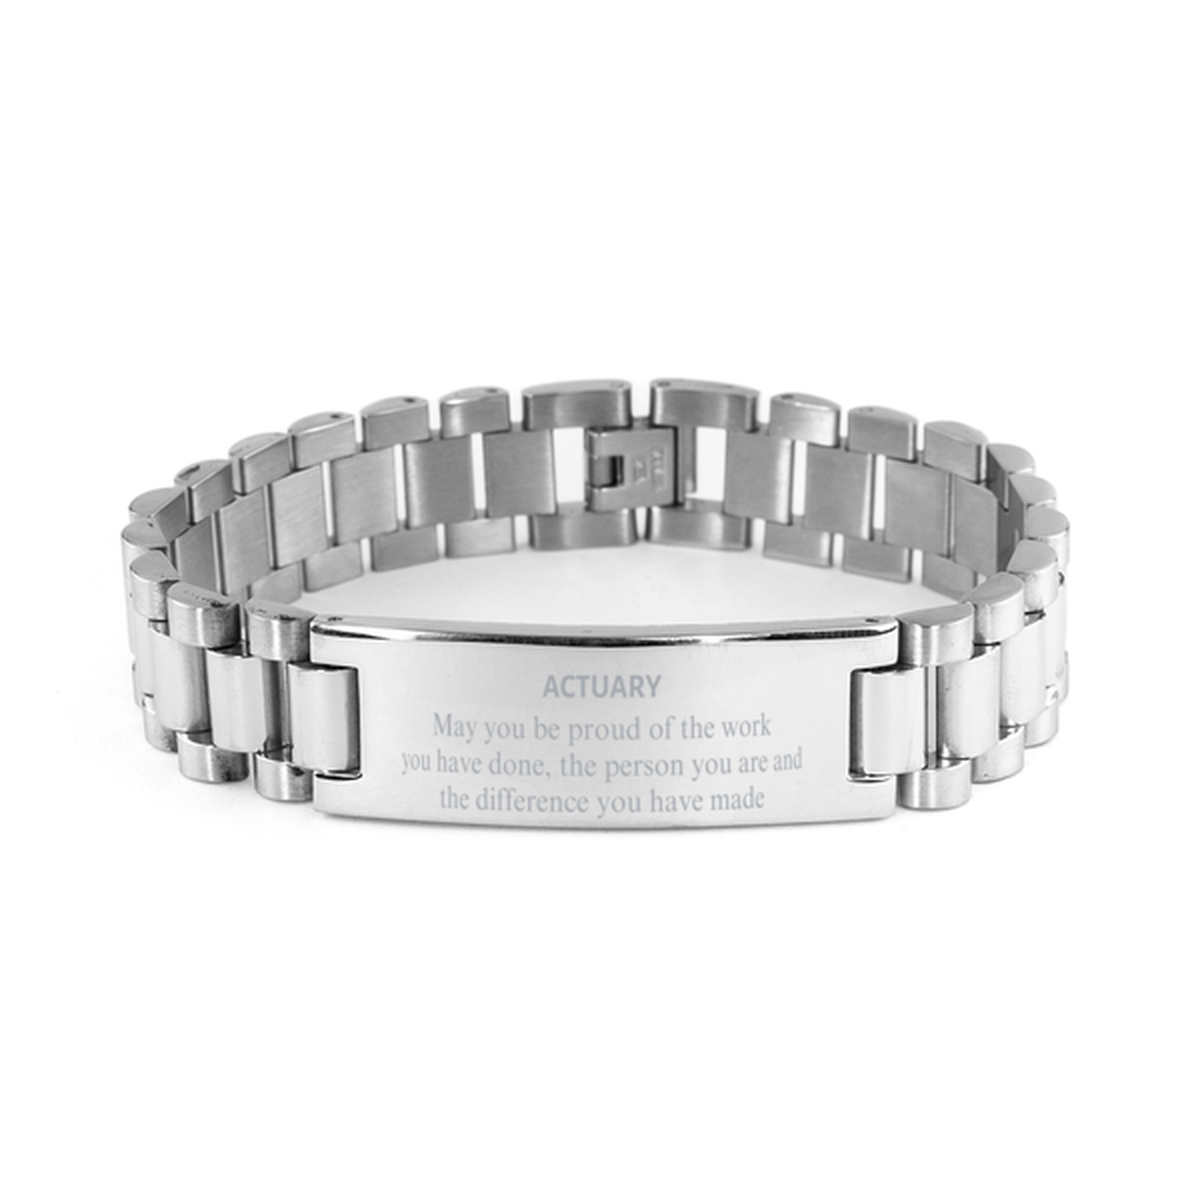 Actuary May you be proud of the work you have done, Retirement Actuary Ladder Stainless Steel Bracelet for Colleague Appreciation Gifts Amazing for Actuary